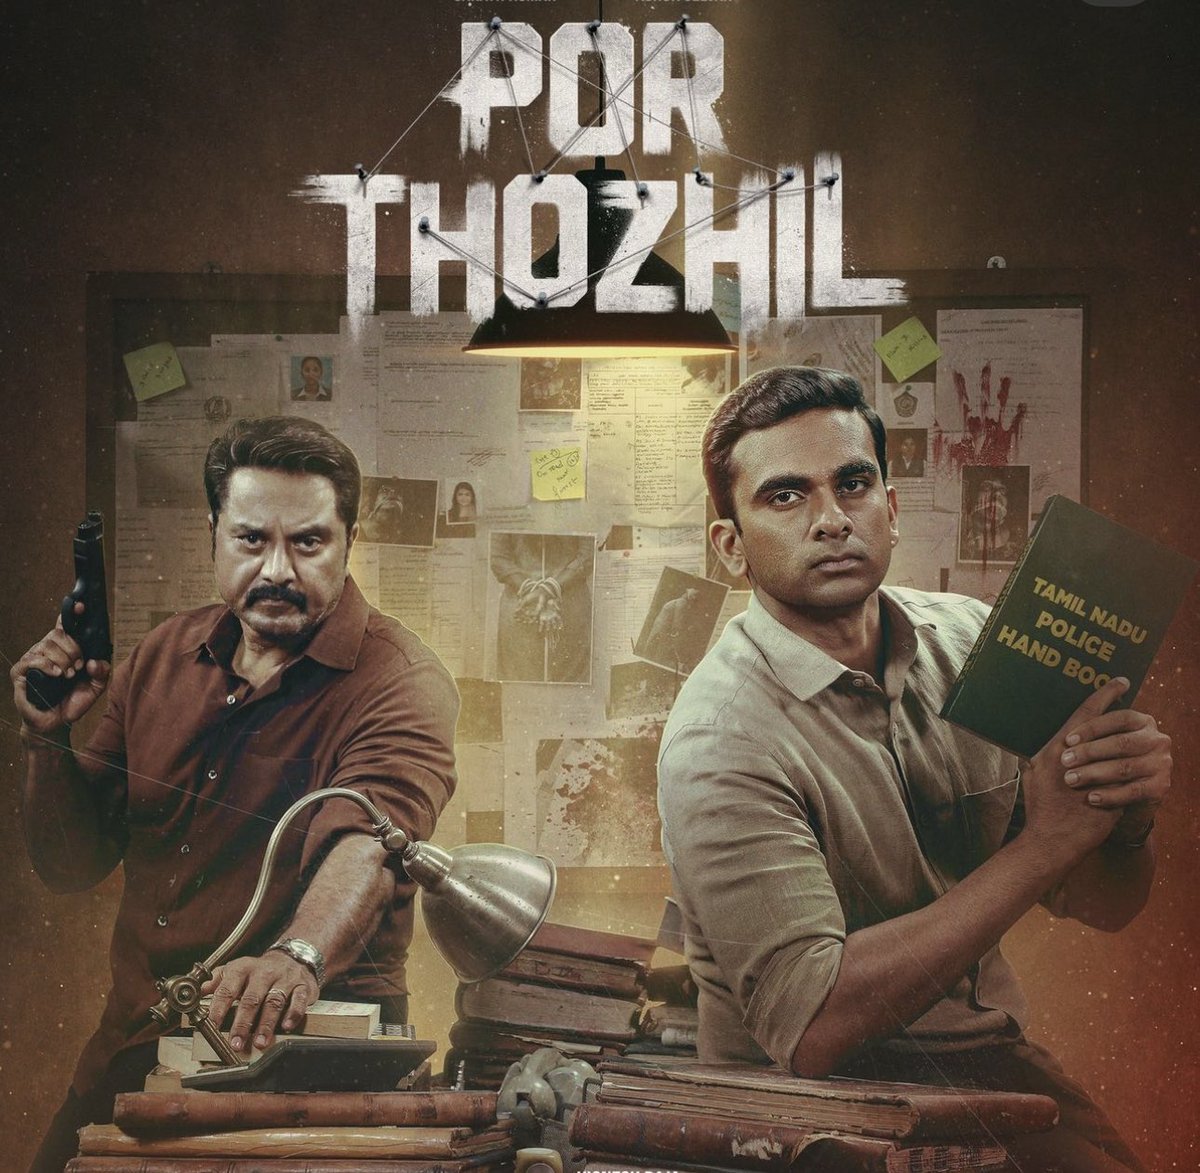 @AshokSelvan so proud and happy for you , what a well made movie and you were fantastic in it so well played ! Sarath sir and the director brilliant work ! #PorThozhil